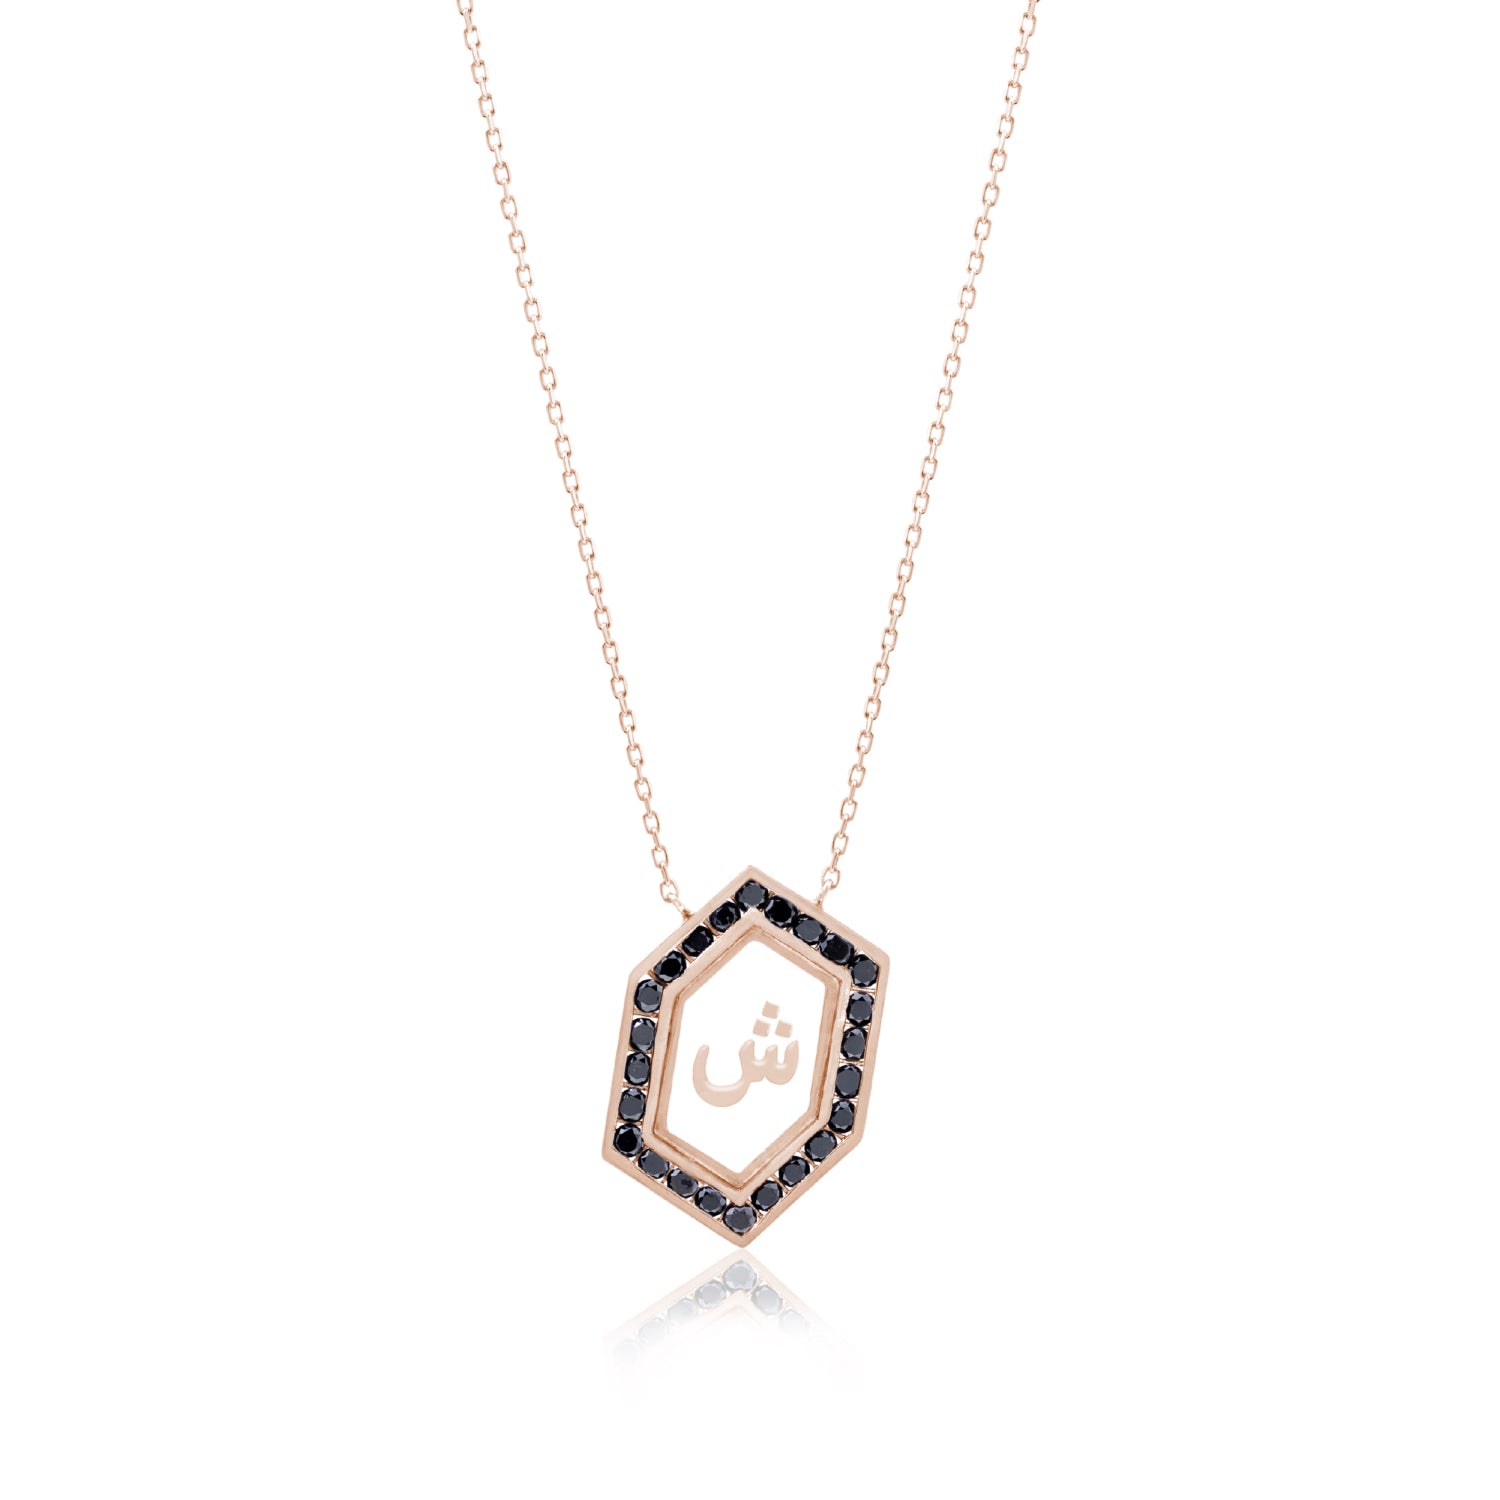 Qamoos 1.0 Letter ش Black Diamond Necklace in Rose Gold